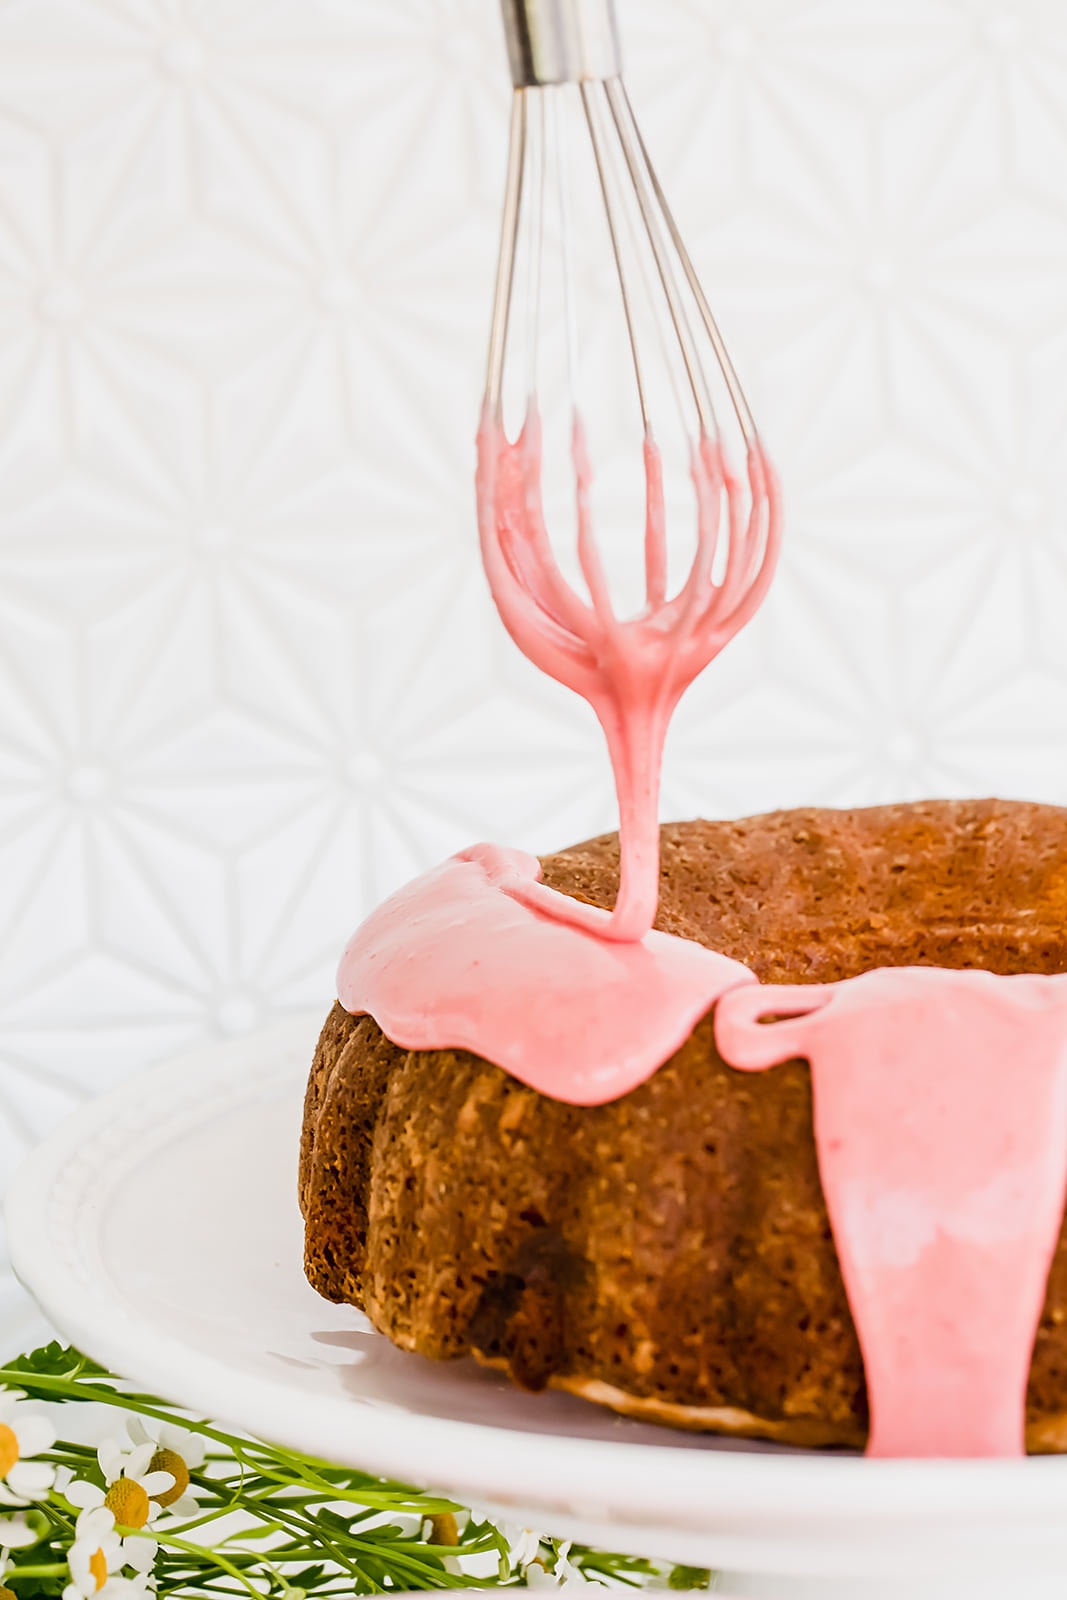 This light, fluffy, and flavorful Strawberry Bundt Cake is made with a fresh strawberry puree and absolutely no artificial colors or flavors! It's the perfect easy yet crowd-pleasing spring or summer cake.